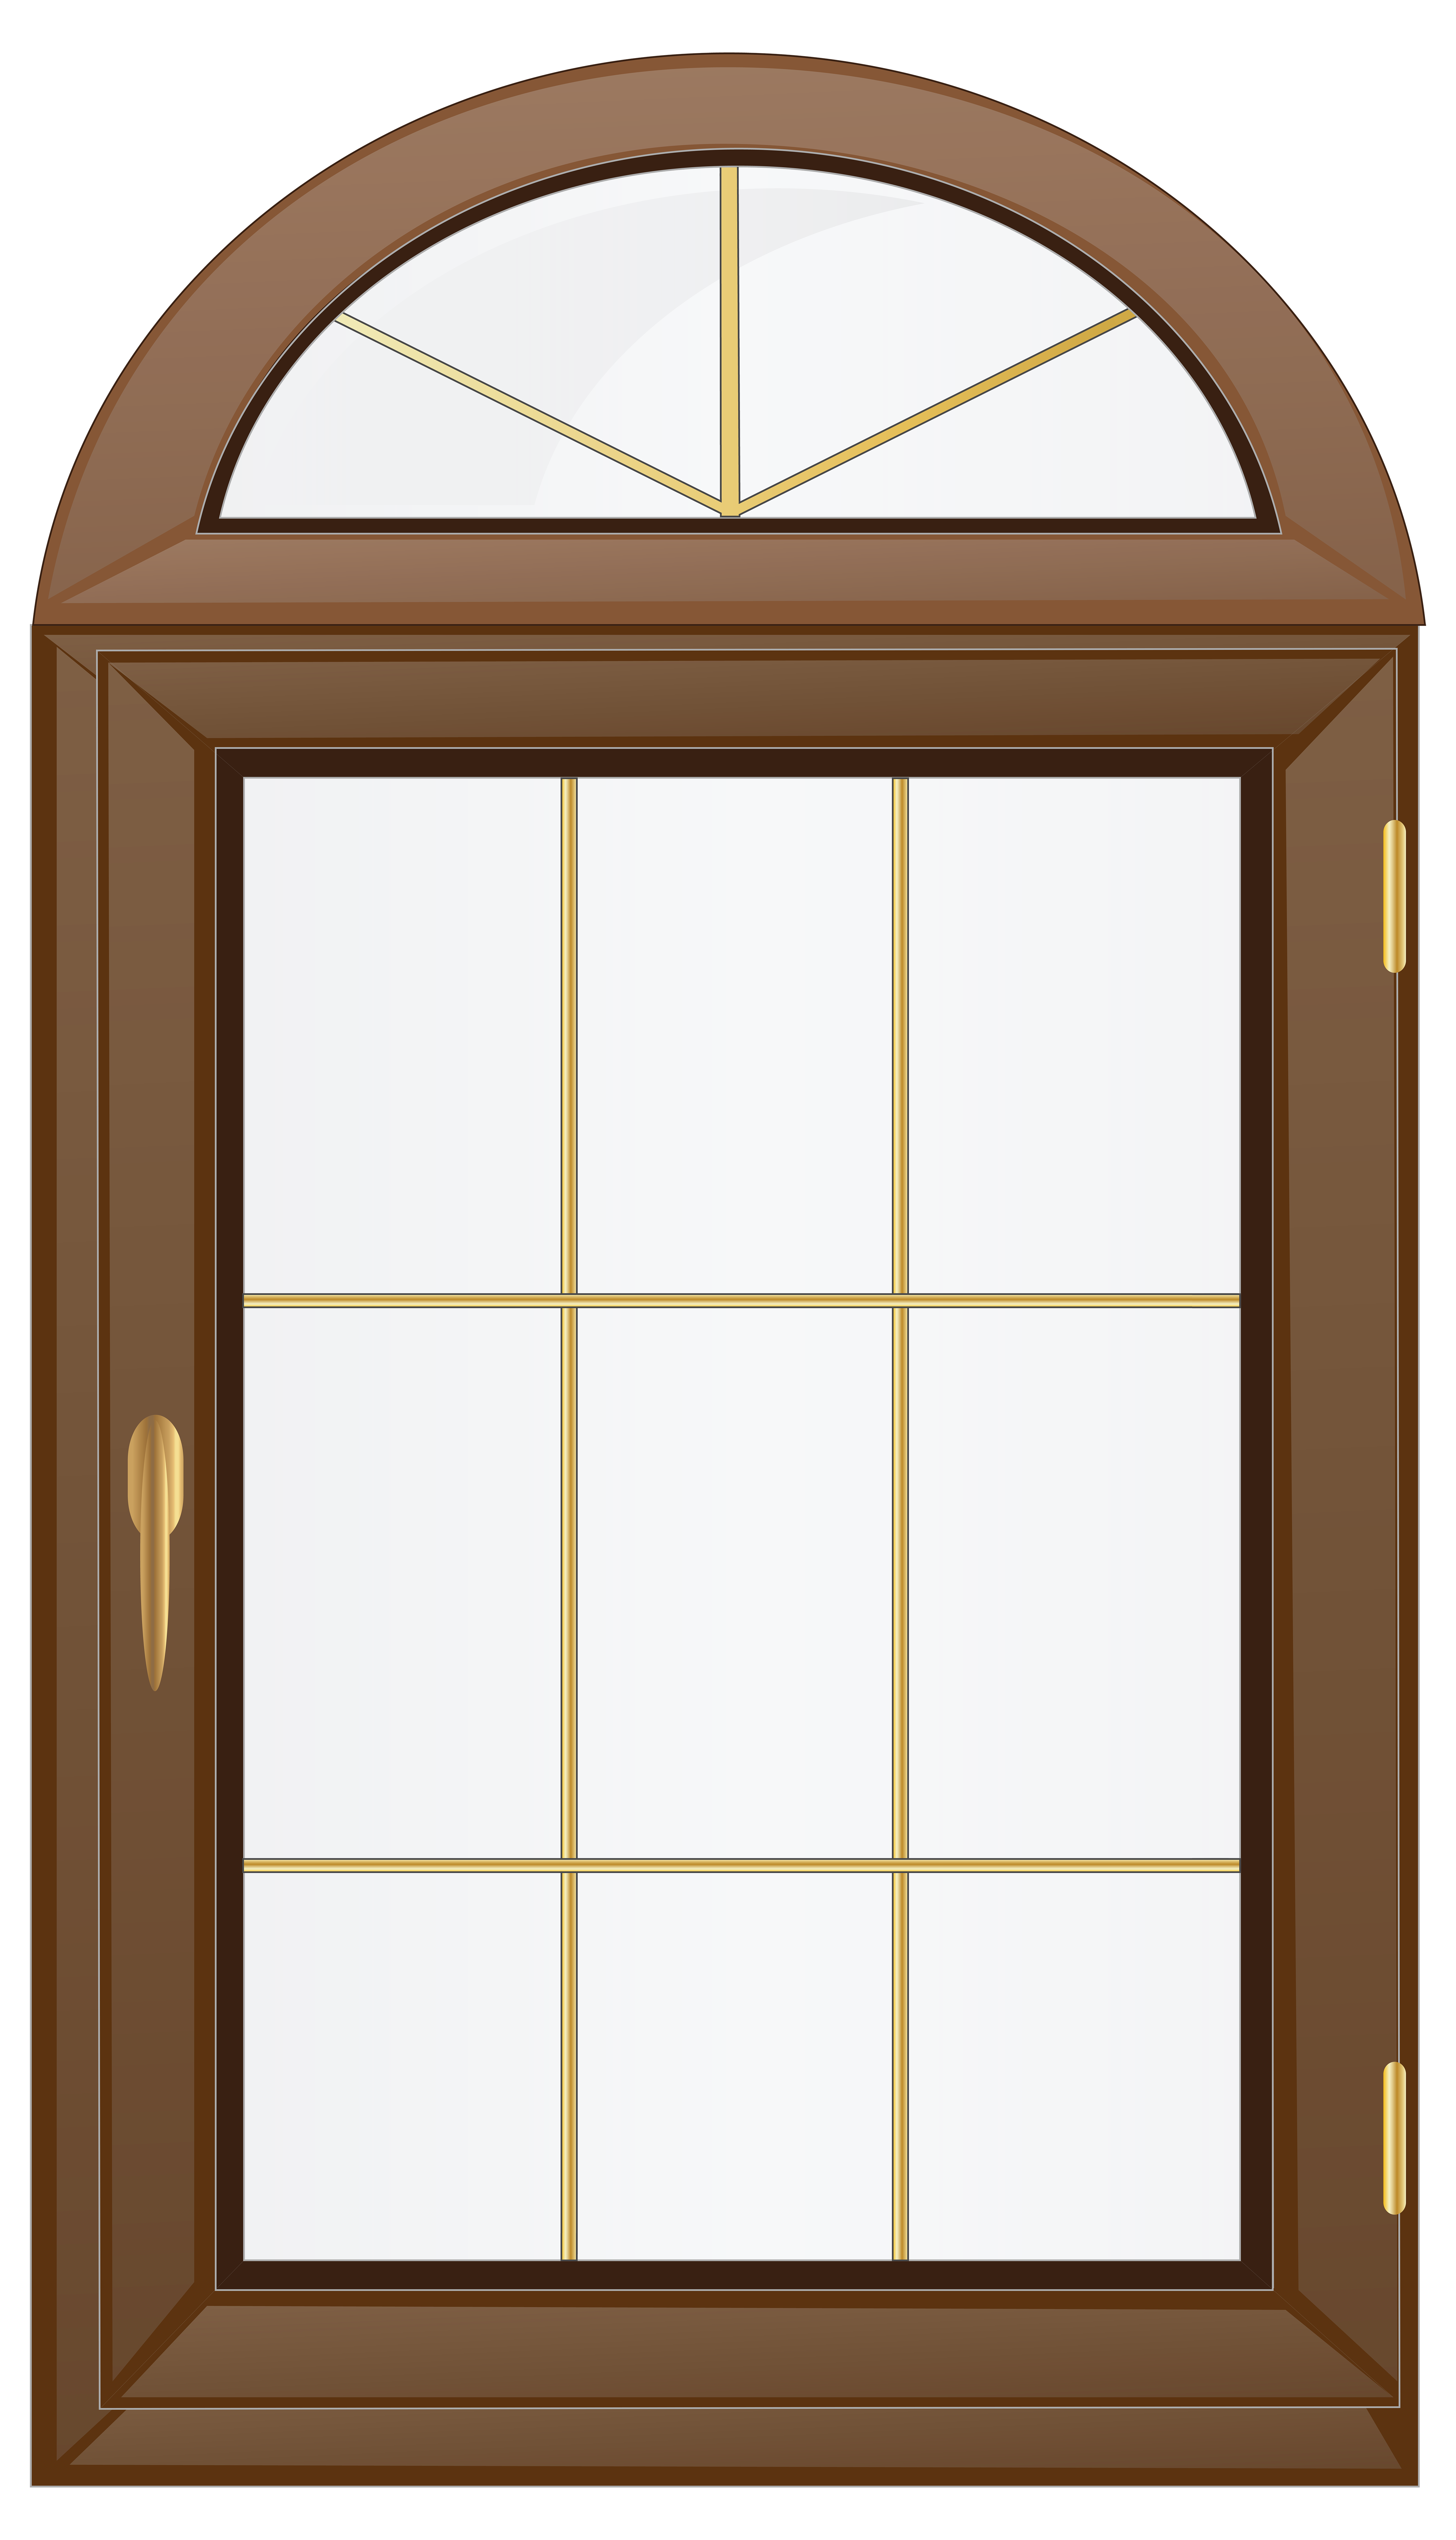 Brown window png clip. Win clipart clipart transparent background